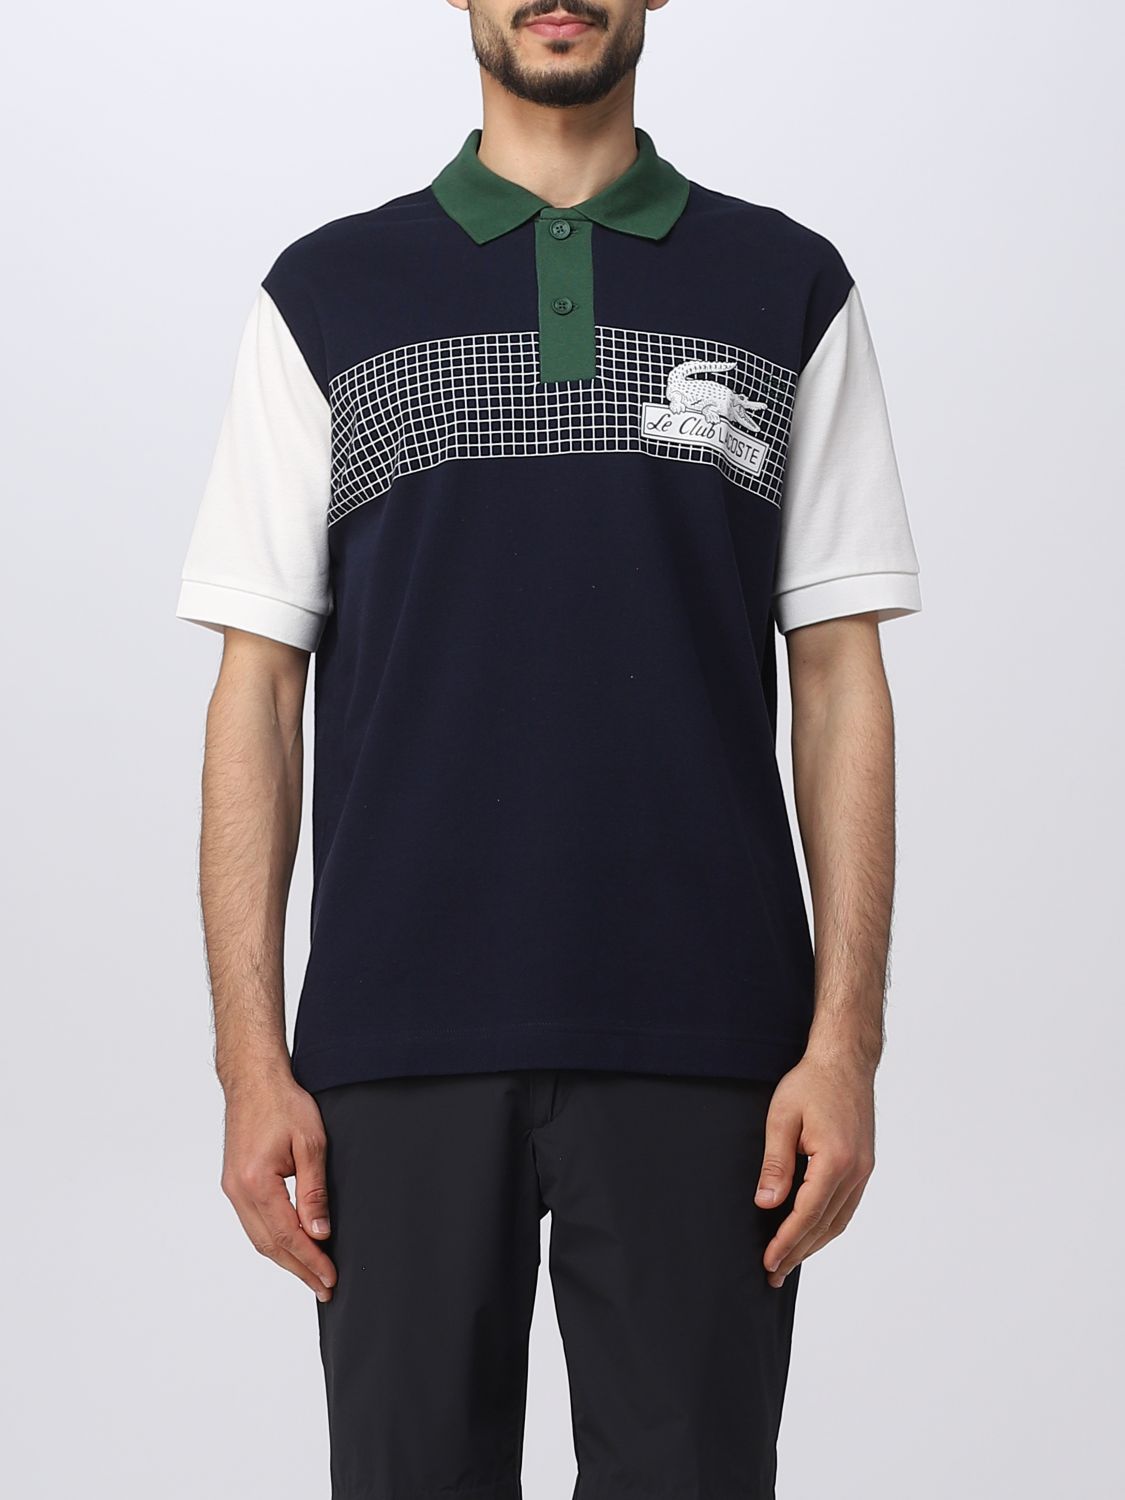 LACOSTE: polo shirt for man - Blue | Lacoste polo shirt PH7822 online ...